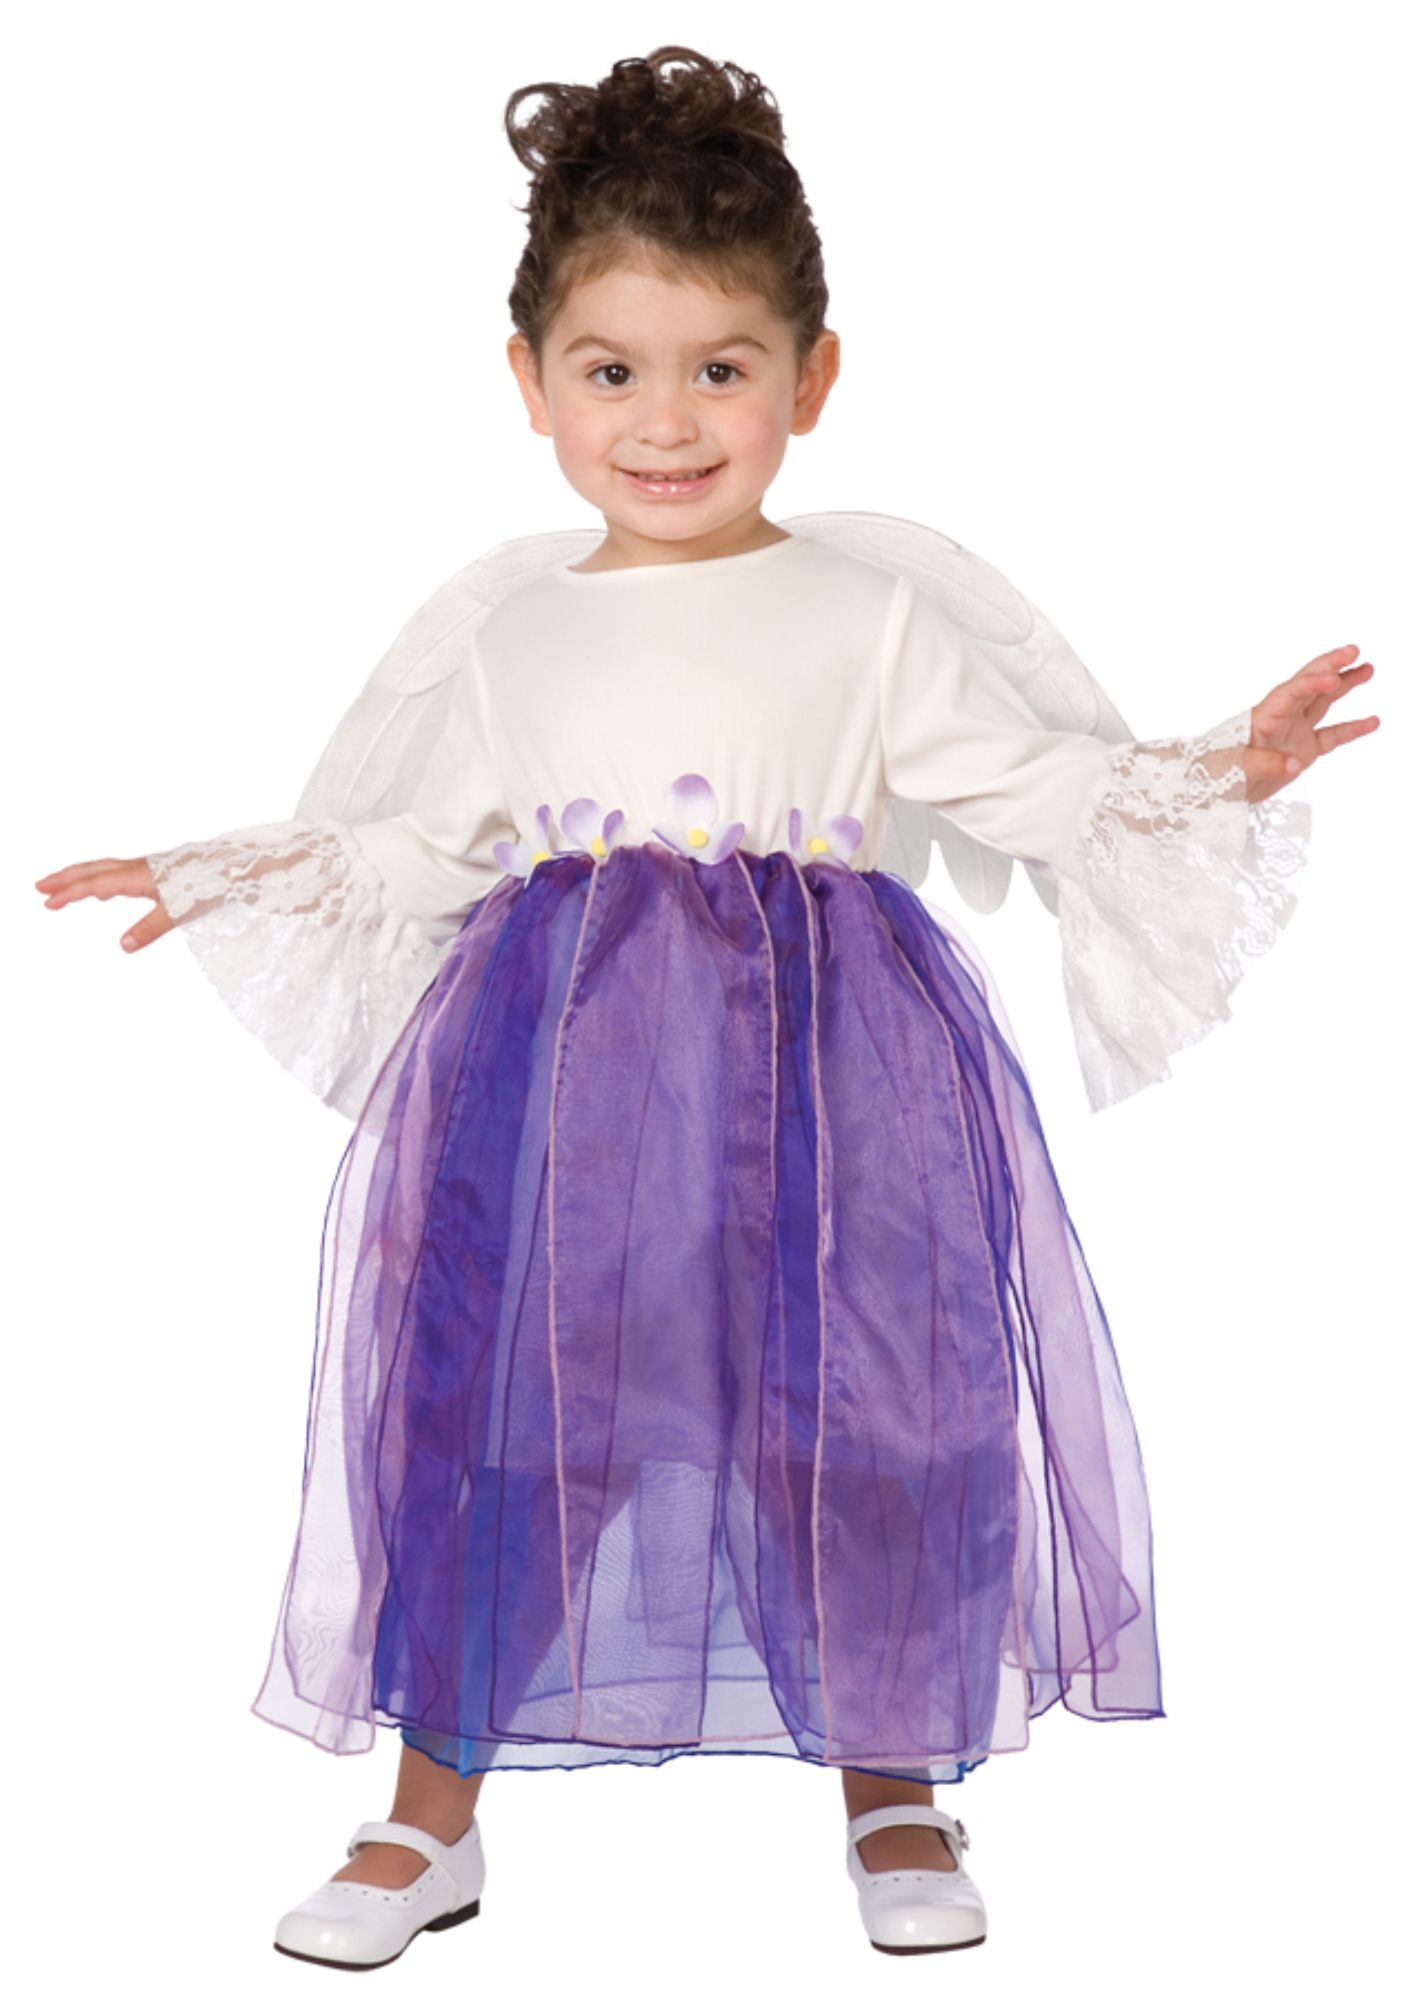 The Costume Center White and Purple Winged Angel Toddler Halloween Costume - Small